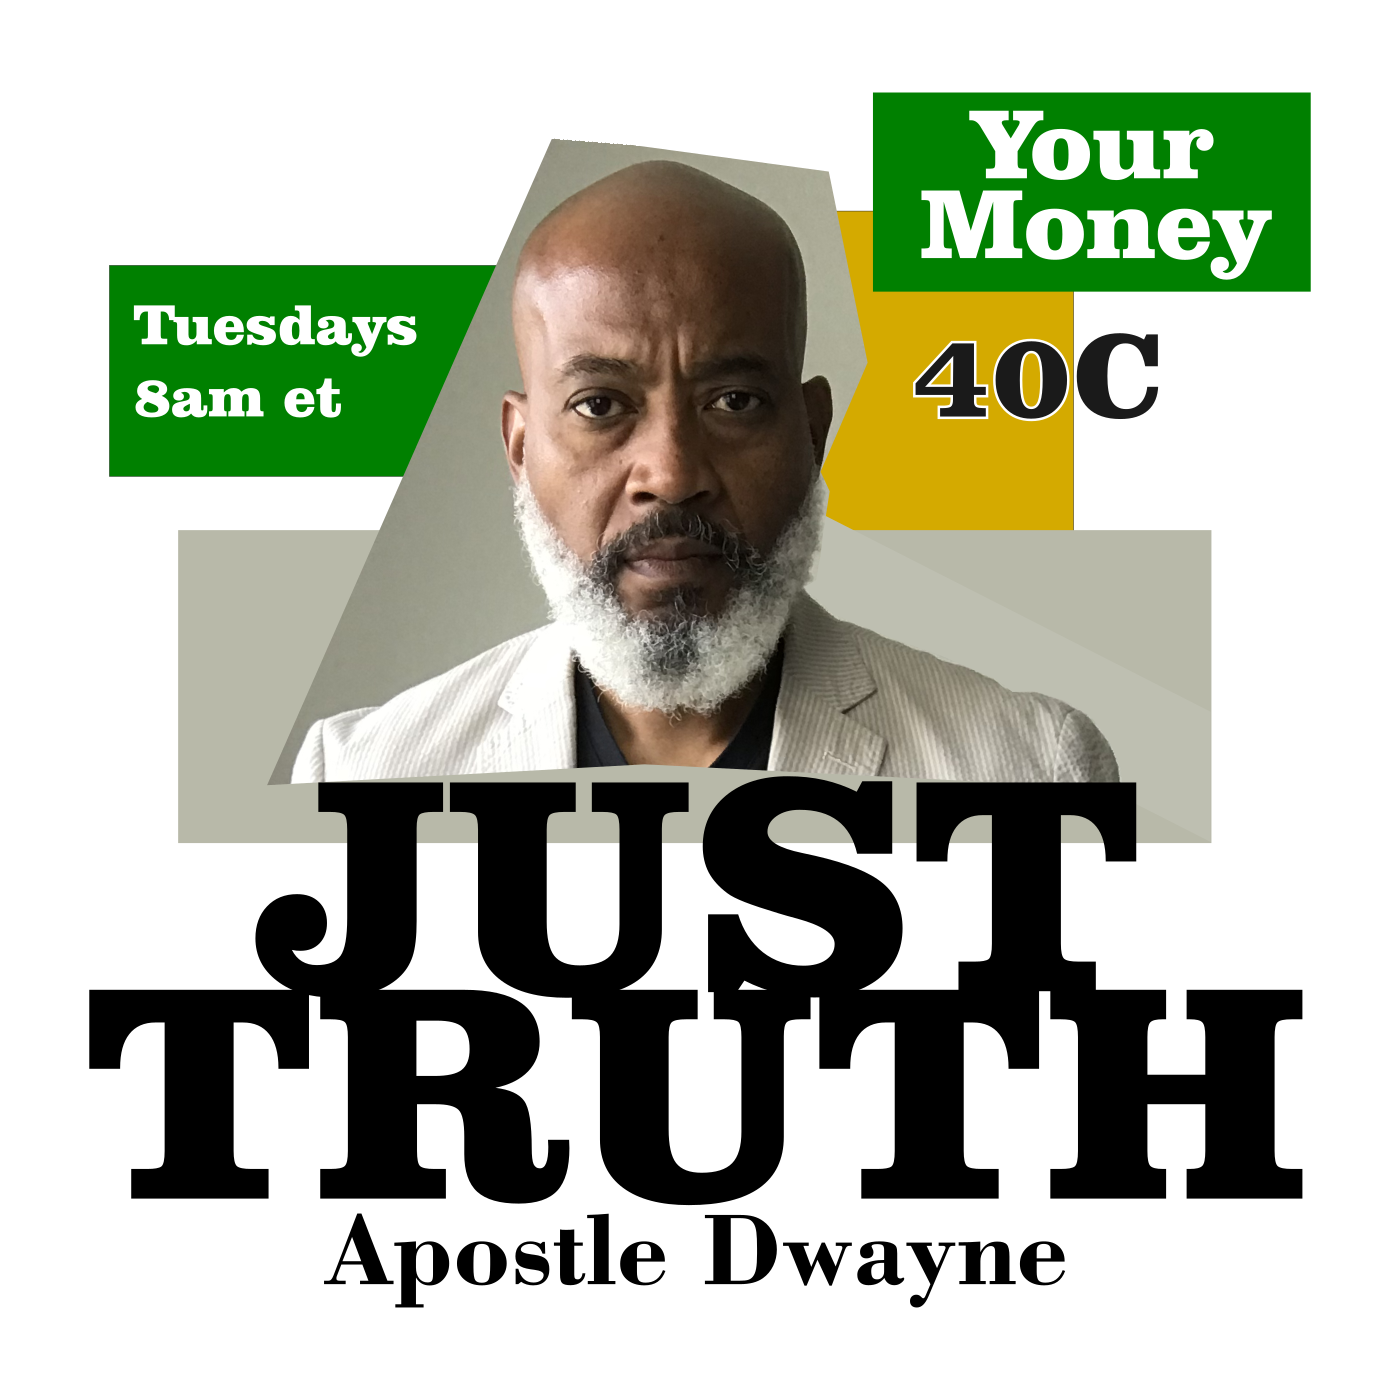 Your Money With Apostle Dwayne